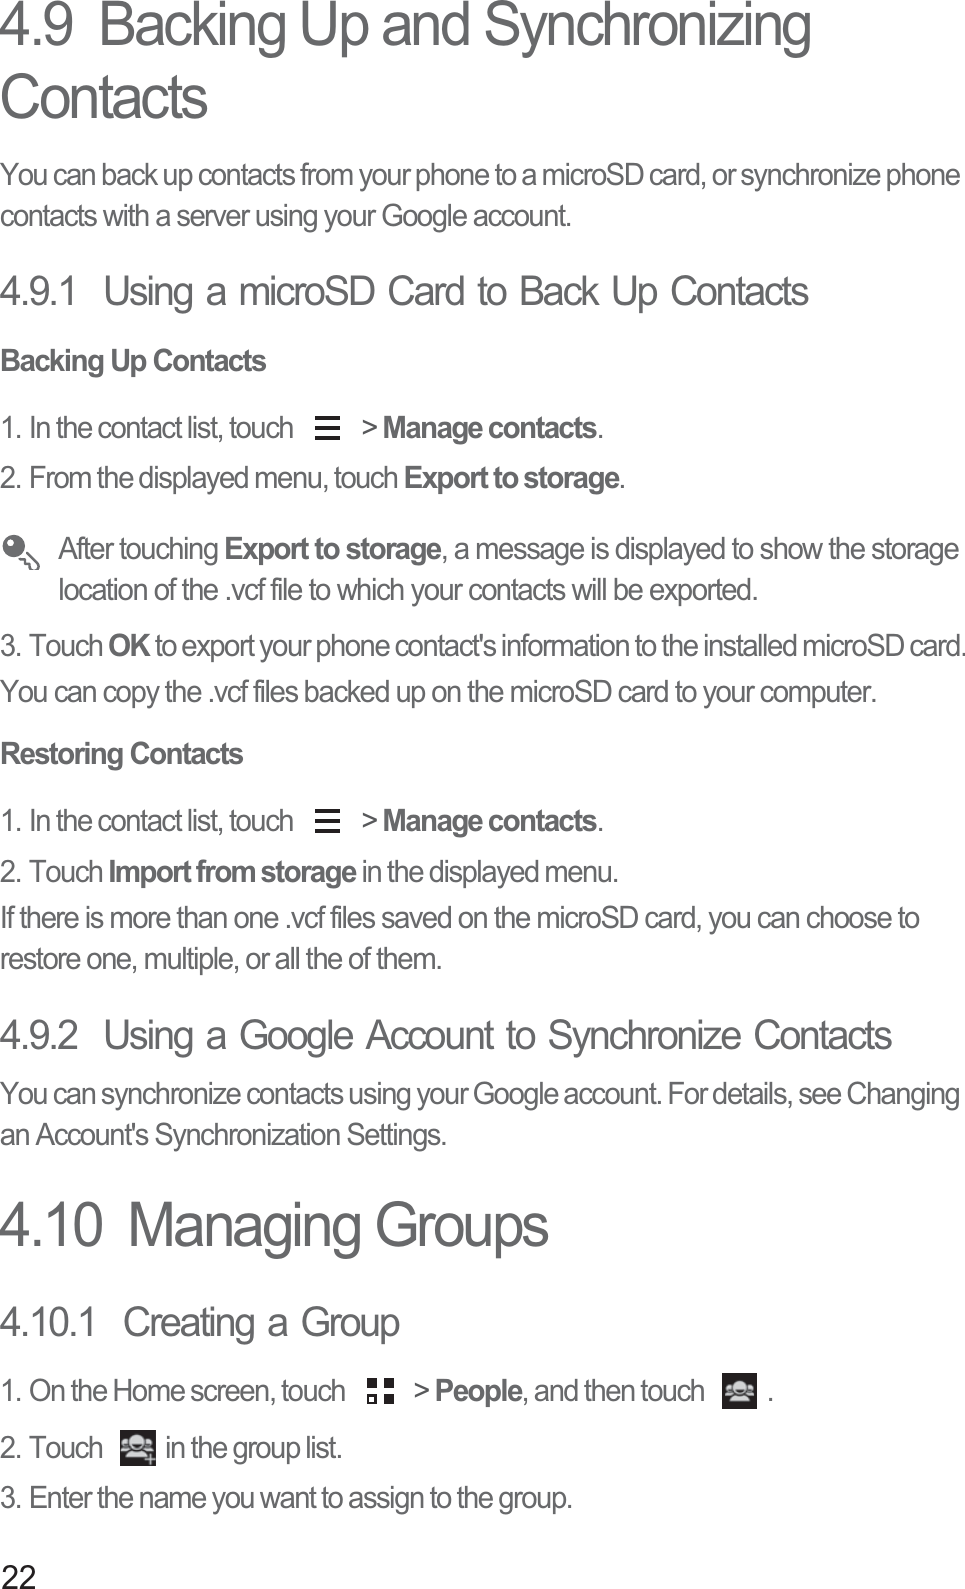 224.9  Backing Up and Synchronizing ContactsYou can back up contacts from your phone to a microSD card, or synchronize phone contacts with a server using your Google account.4.9.1  Using a microSD Card to Back Up ContactsBacking Up Contacts1. In the contact list, touch   &gt; Manage contacts. 2. From the displayed menu, touch Export to storage.  After touching Export to storage, a message is displayed to show the storage location of the .vcf file to which your contacts will be exported. 3. Touch OK to export your phone contact&apos;s information to the installed microSD card.You can copy the .vcf files backed up on the microSD card to your computer. Restoring Contacts1. In the contact list, touch   &gt; Manage contacts.2. Touch Import from storage in the displayed menu.If there is more than one .vcf files saved on the microSD card, you can choose to restore one, multiple, or all the of them.4.9.2  Using a Google Account to Synchronize Contacts You can synchronize contacts using your Google account. For details, see Changing an Account&apos;s Synchronization Settings.4.10  Managing Groups4.10.1  Creating a Group1. On the Home screen, touch   &gt; People, and then touch  .2. Touch  in the group list. 3. Enter the name you want to assign to the group.